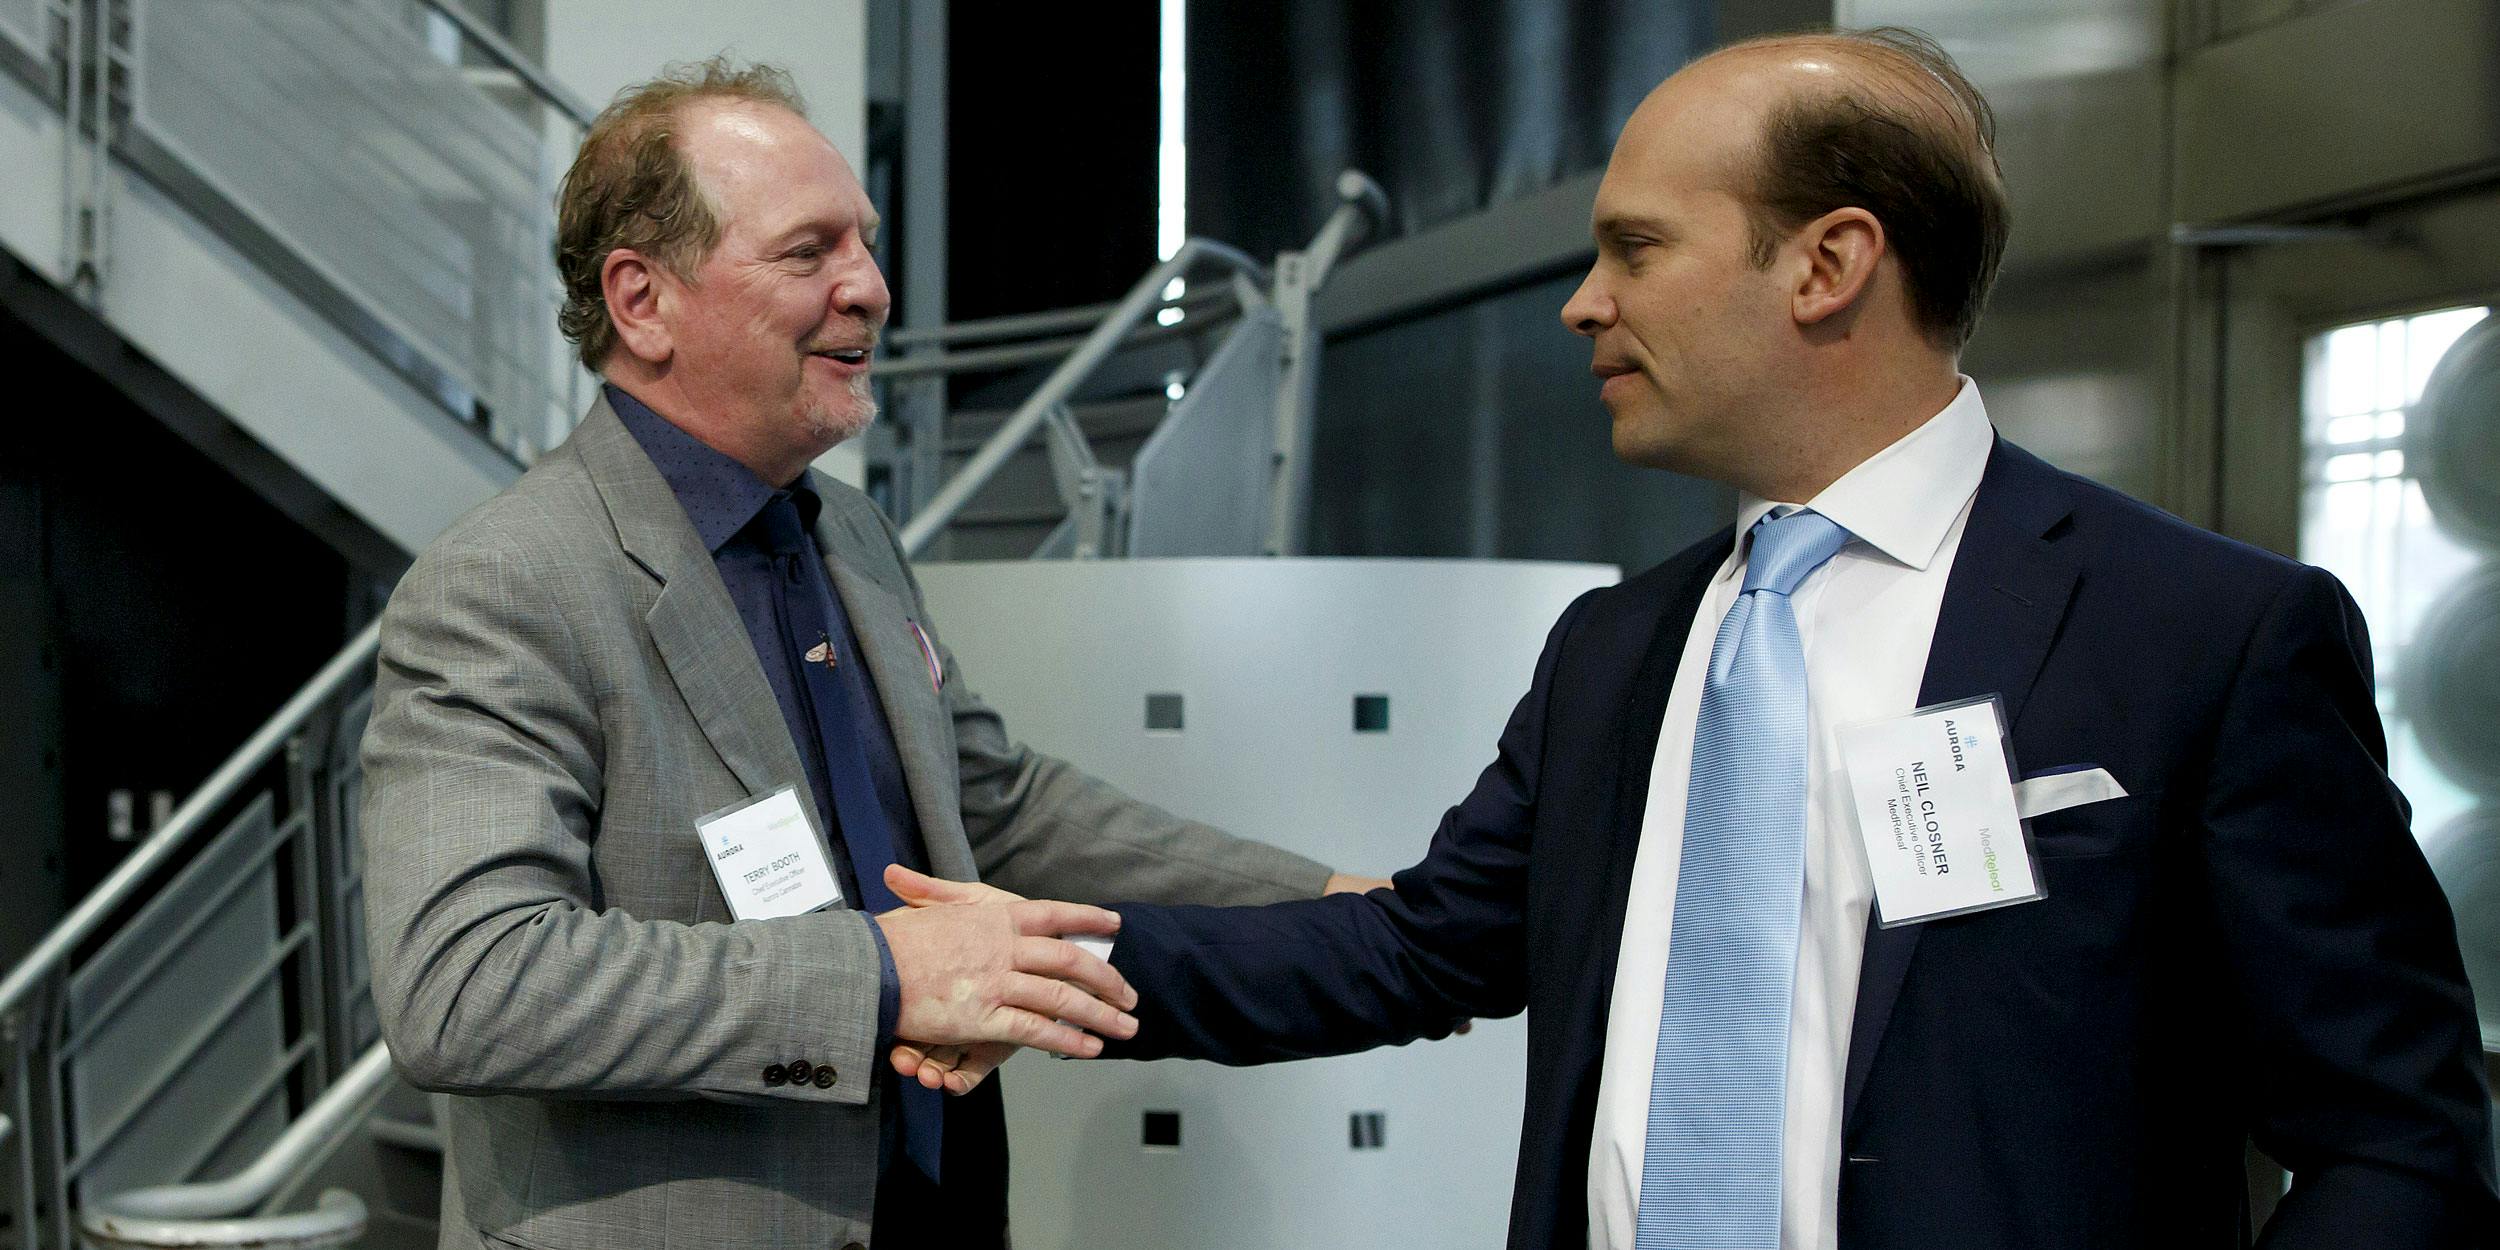 Terry Booth, chief executive officer of Aurora Cannabis Inc., left, shakes hands with Neil Closner, chief executive officer of MedReleaf Corp., during a news conference at the Toronto Stock Exchange